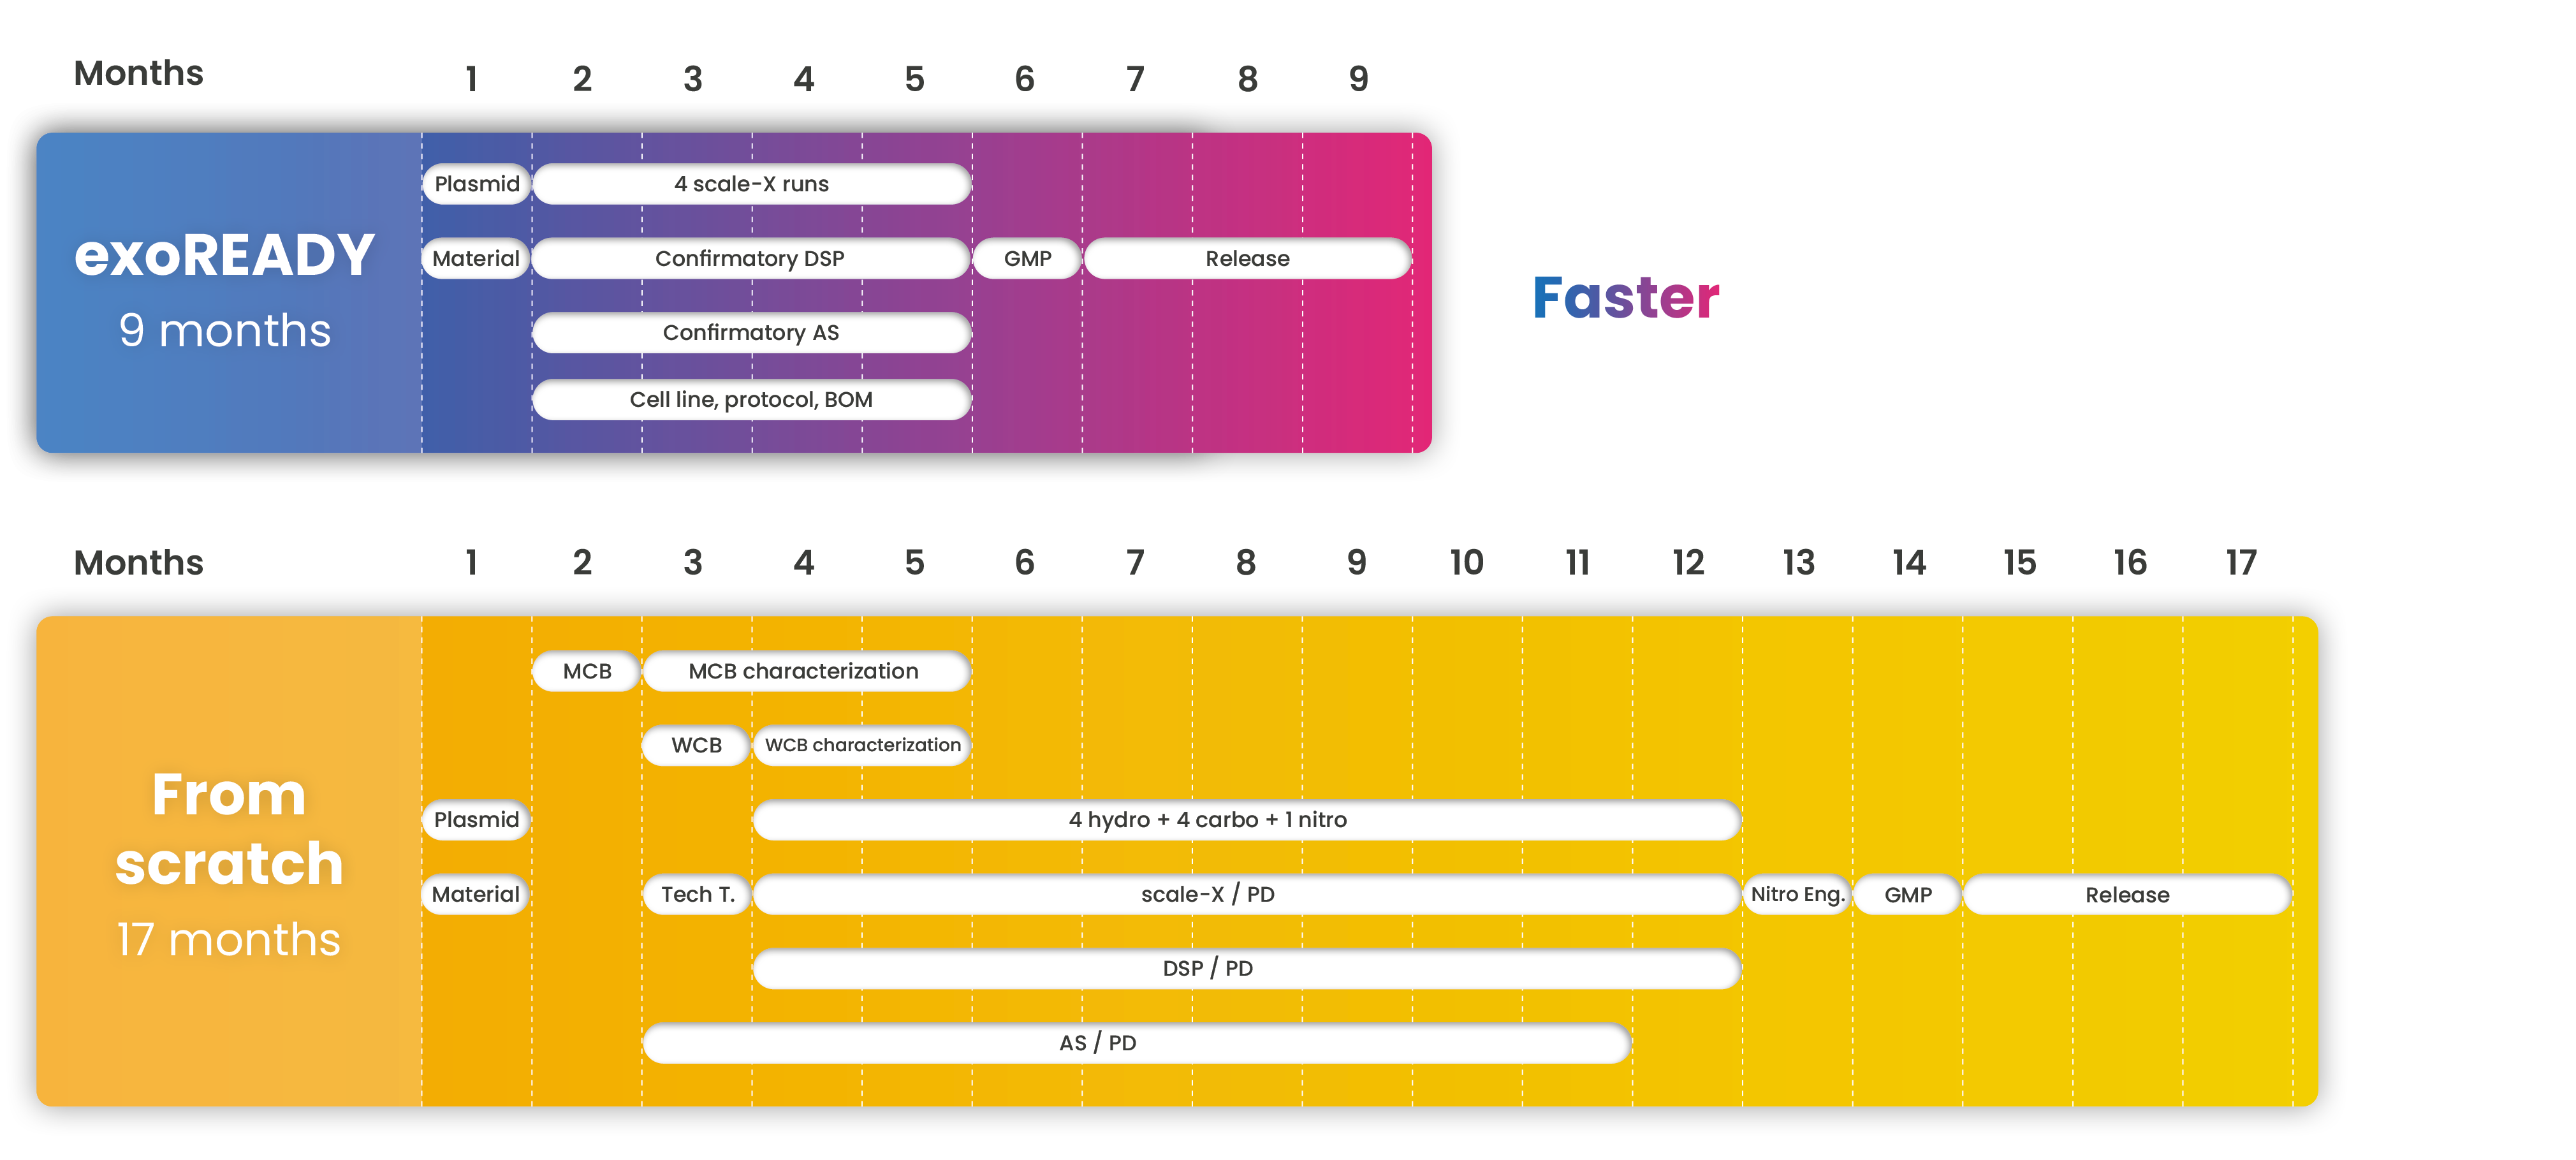 Viral vectors technology platform and evolution exoready clinical phase timeline comparison